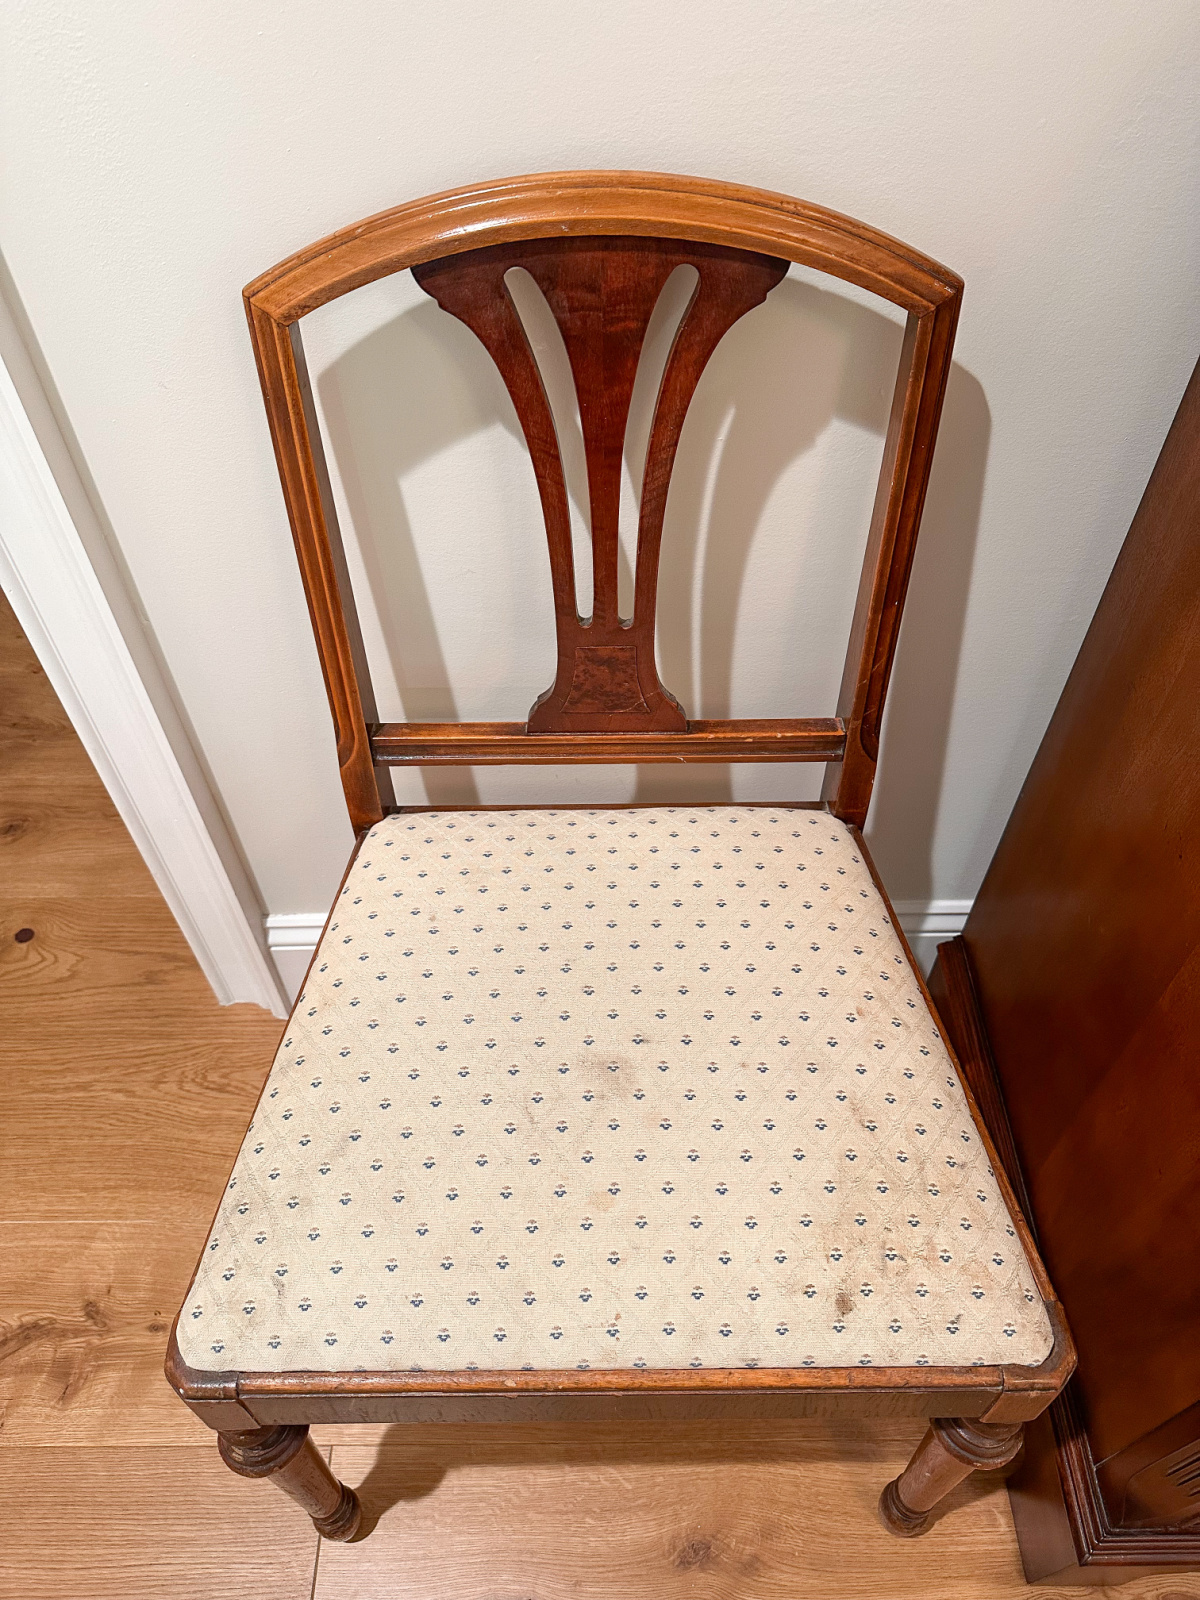 Old dining chair needing reupholstry.